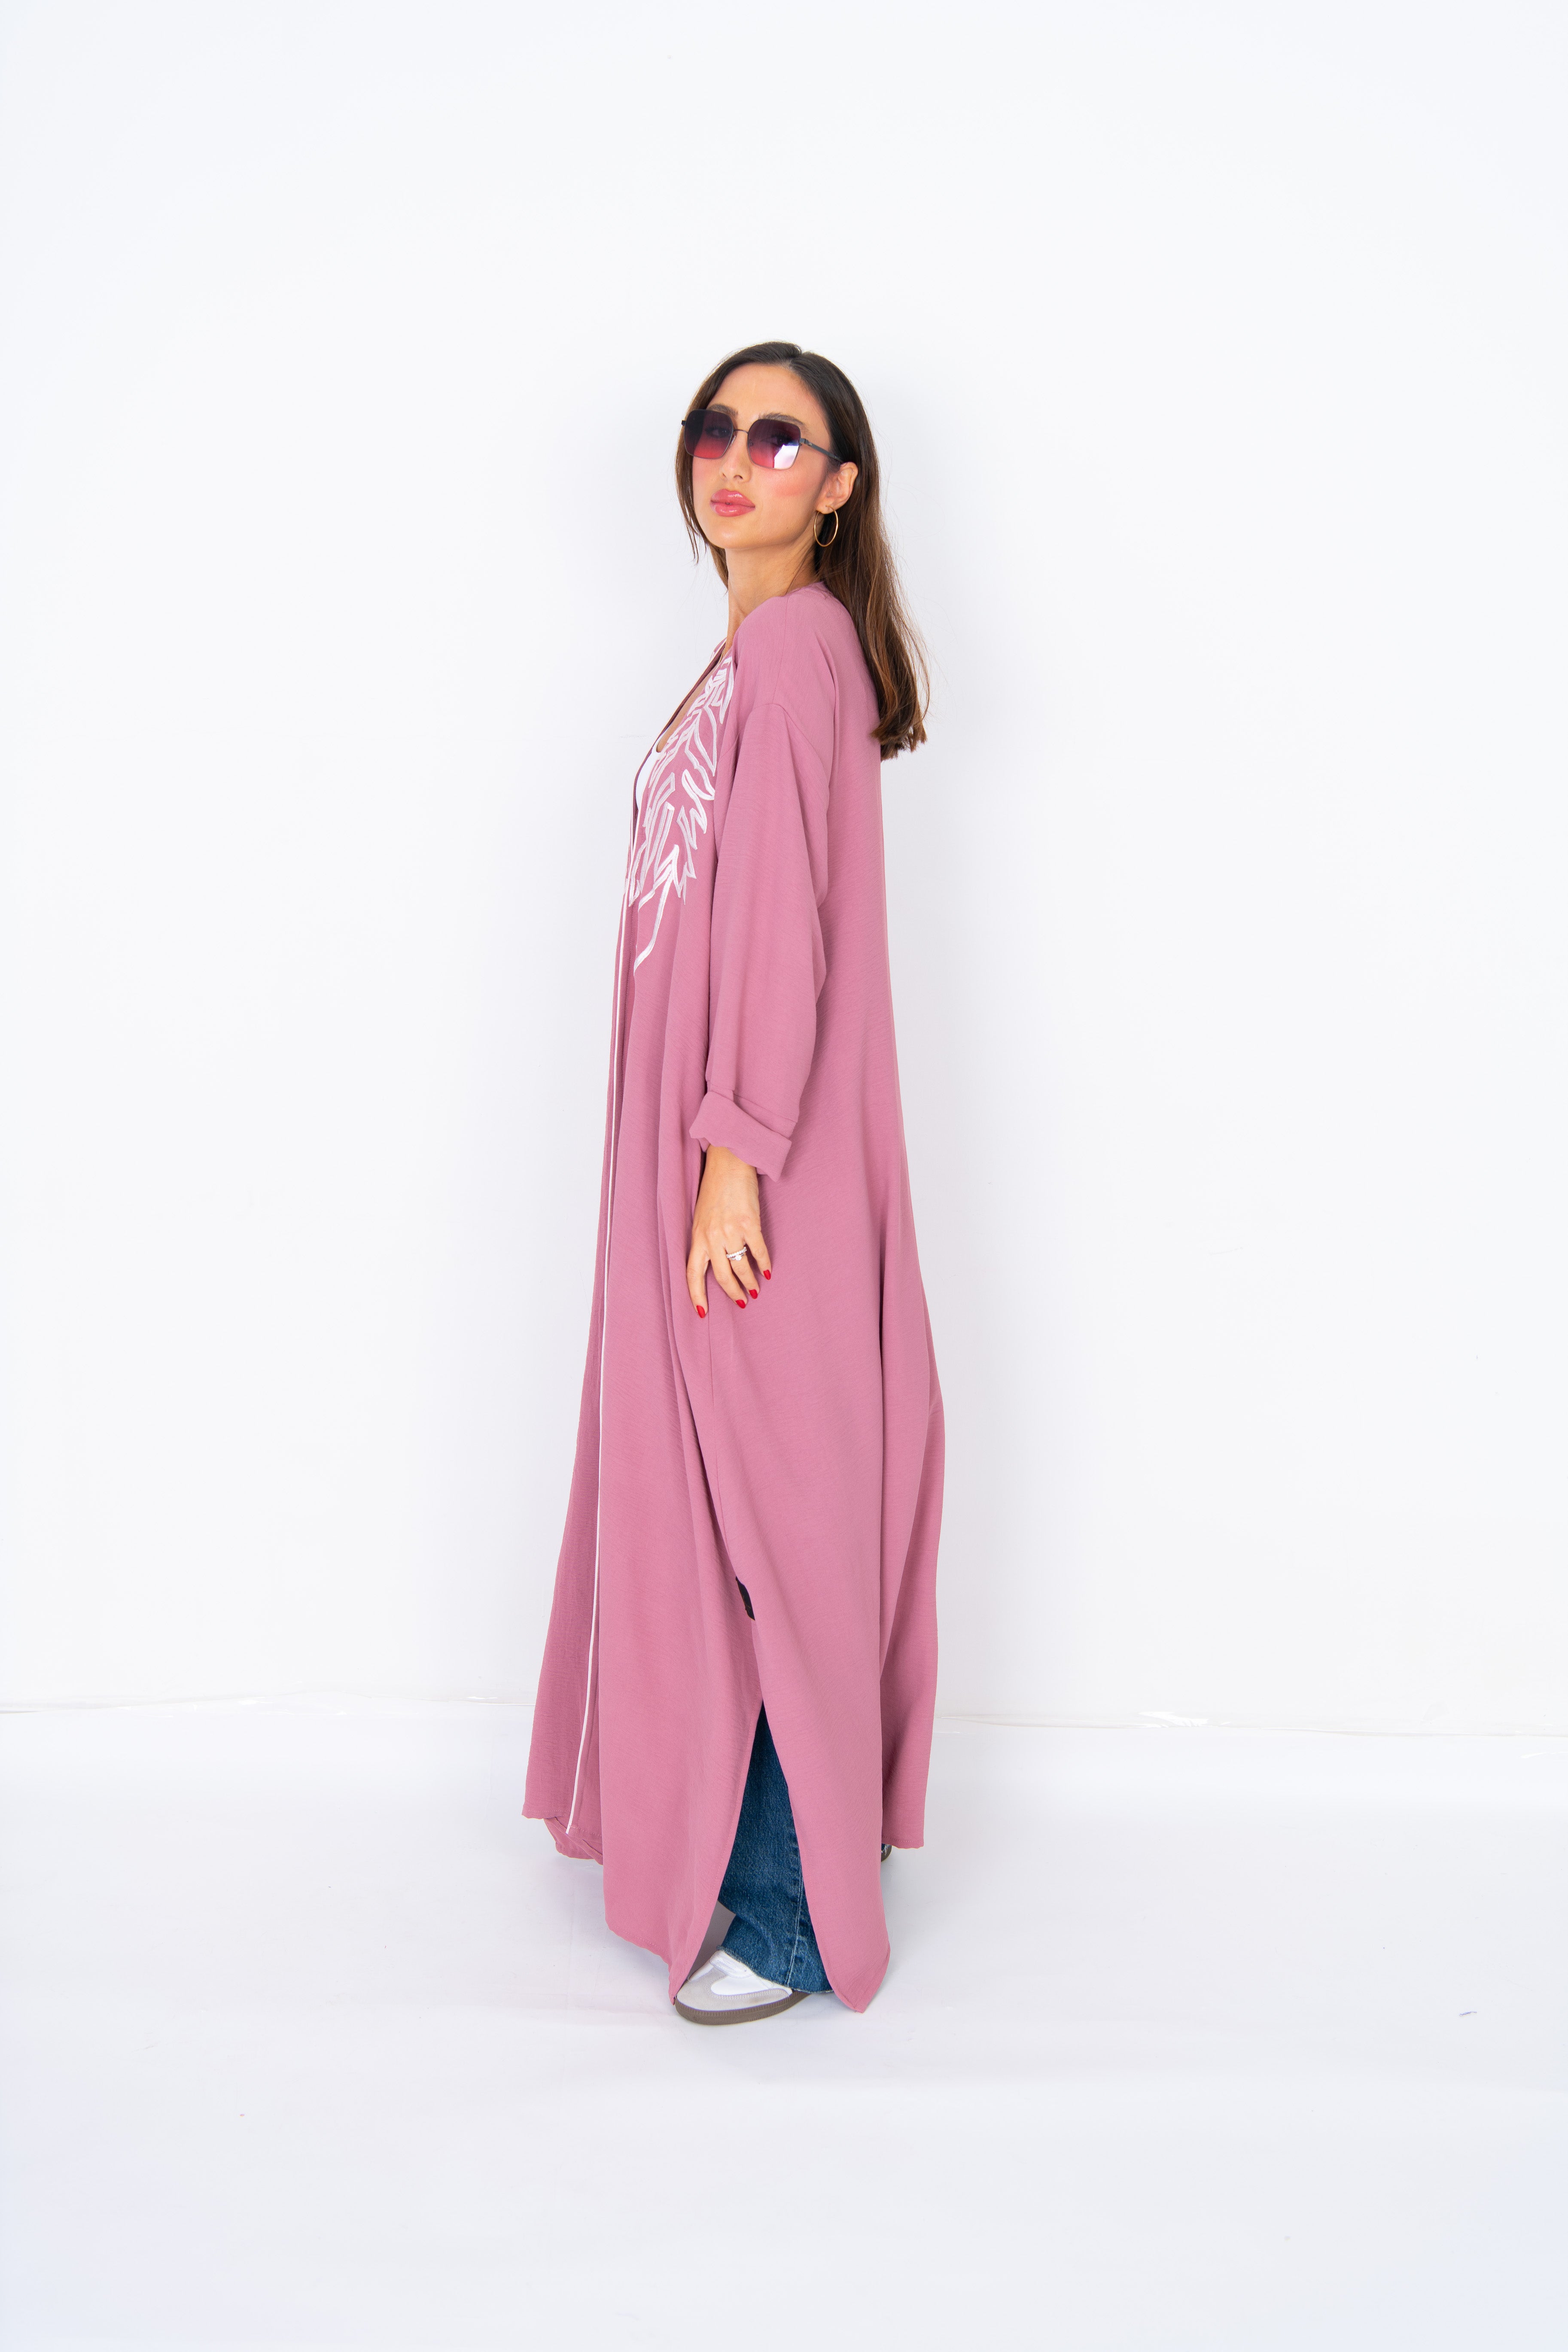 Layla Dusty Pink Crepe Abaya with White Embroidery